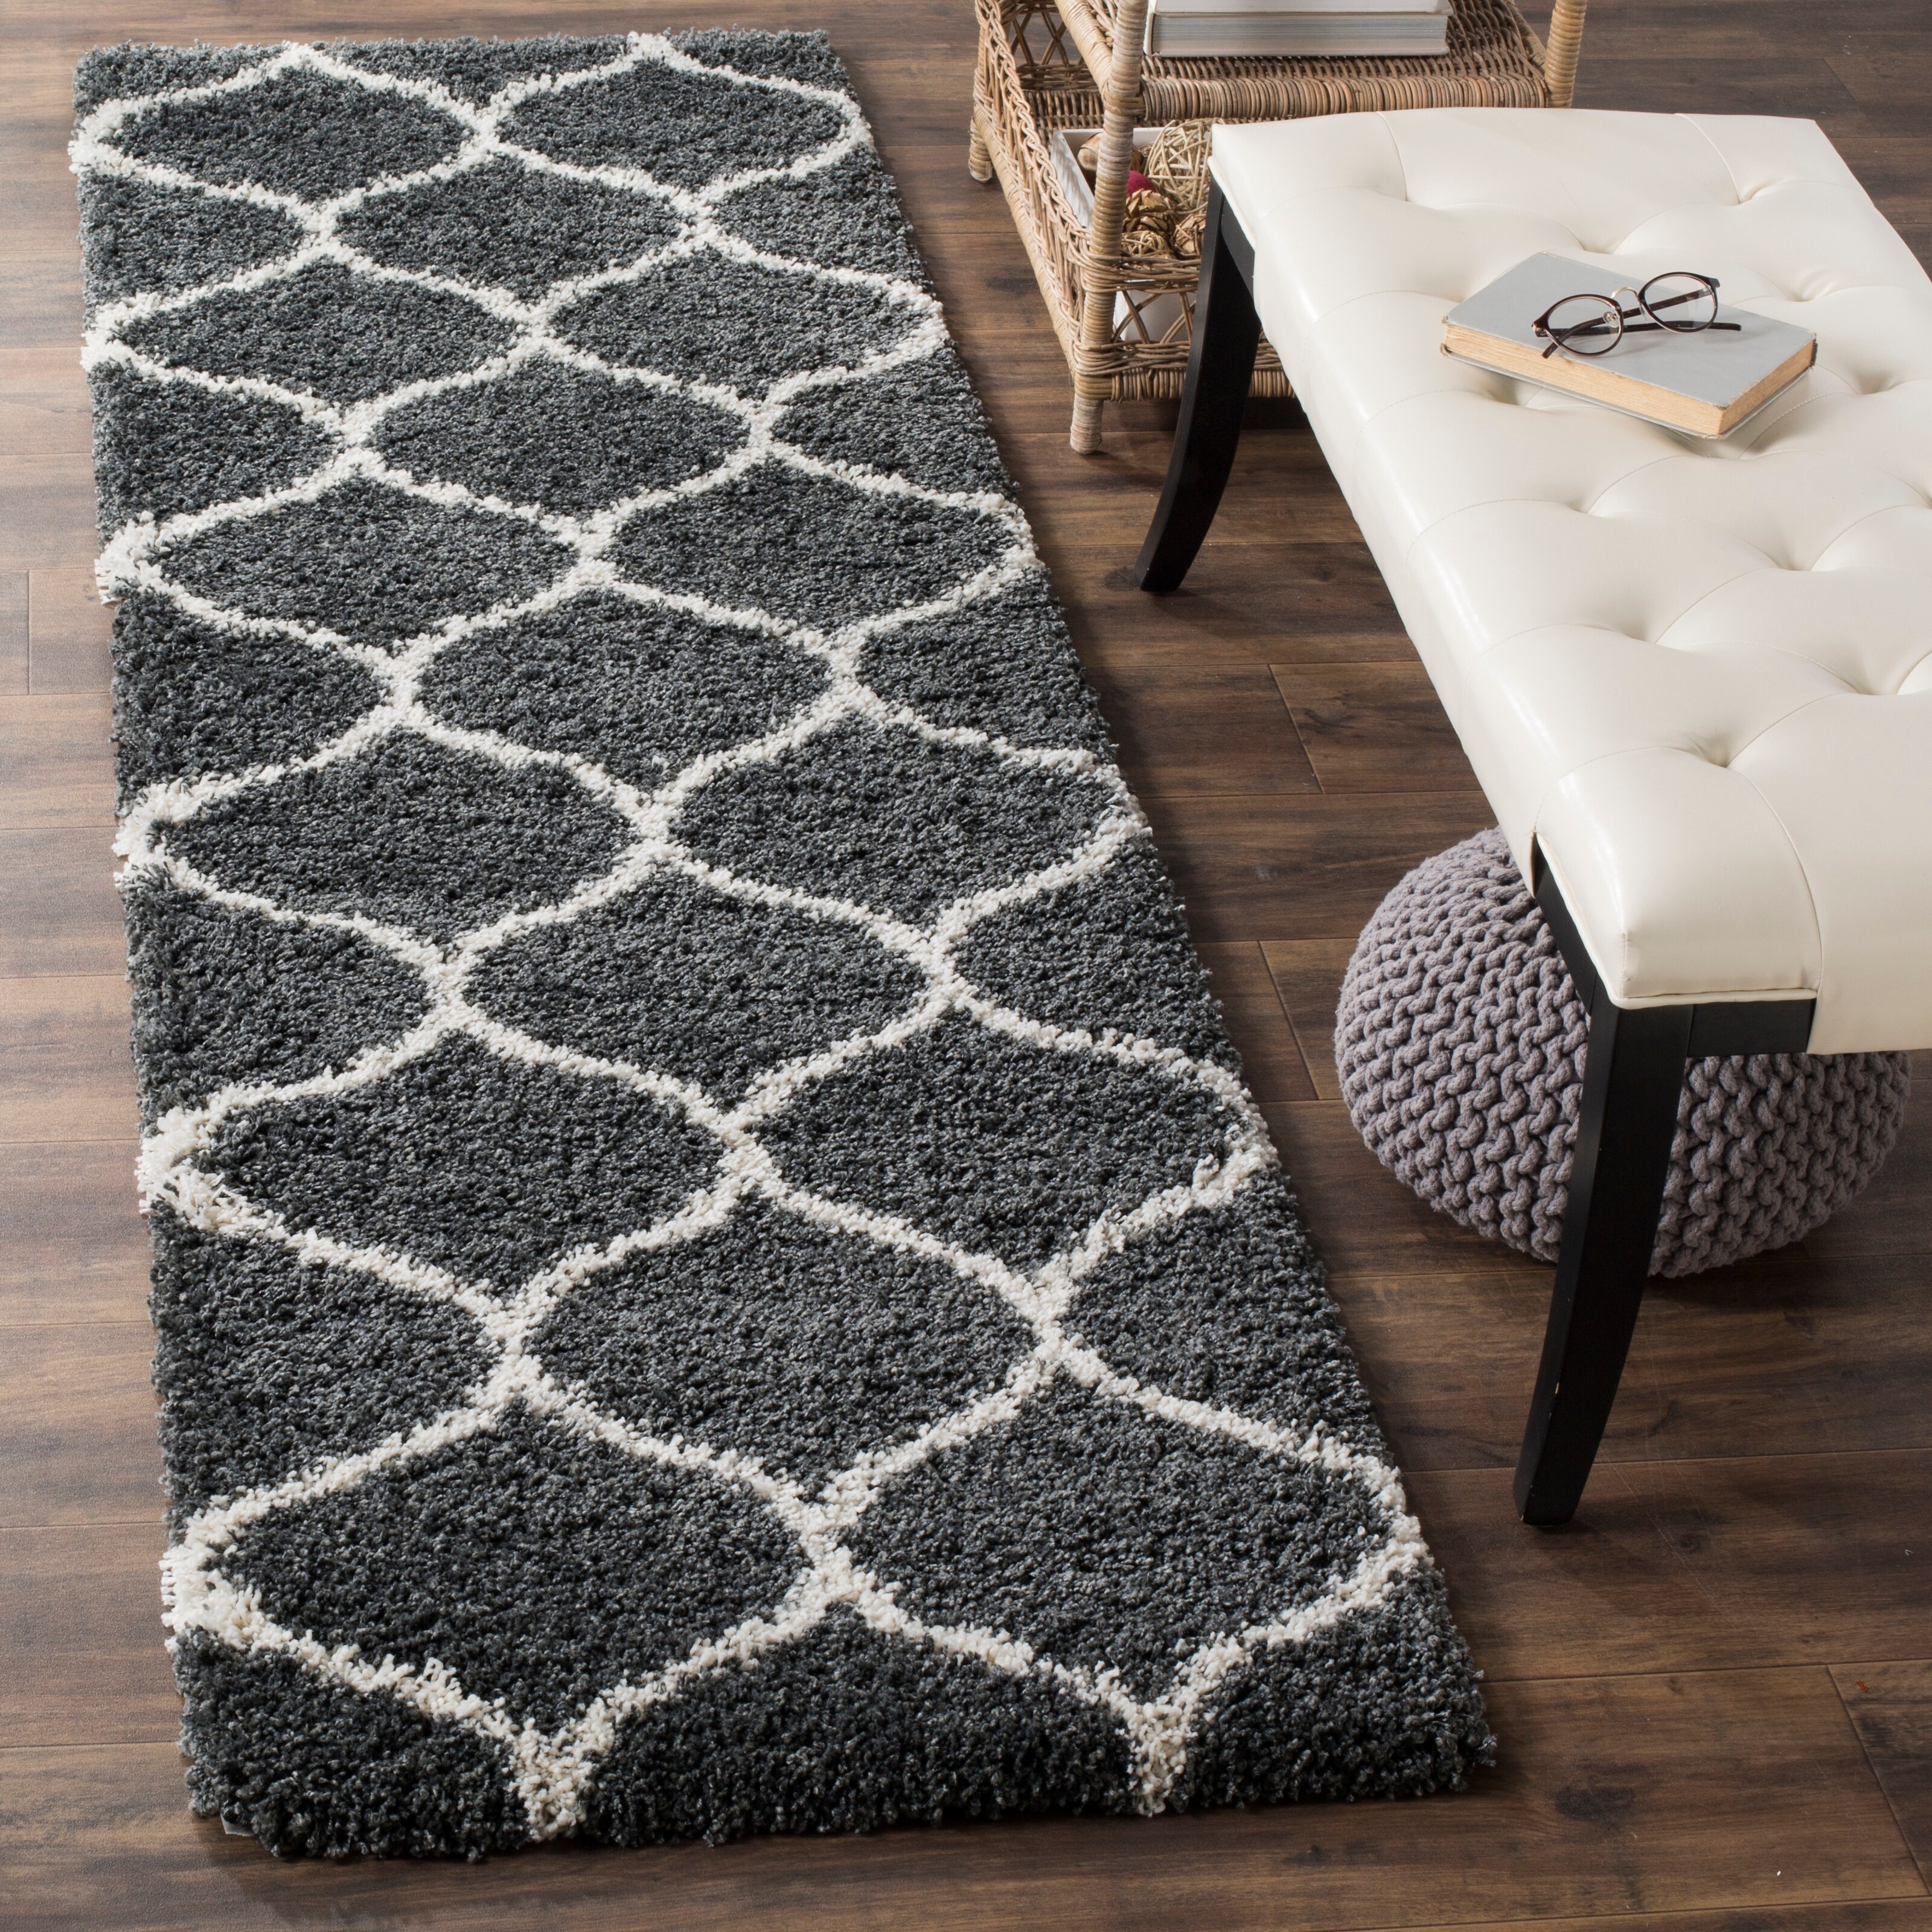 Grey 10' x 14' SAFAVIEH Hudson Shag Collection SGH280B Moroccan Ogee Trellis Non-Shedding Living Room Bedroom Dining Room Entryway Plush 2-inch Thick Area Rug Ivory 